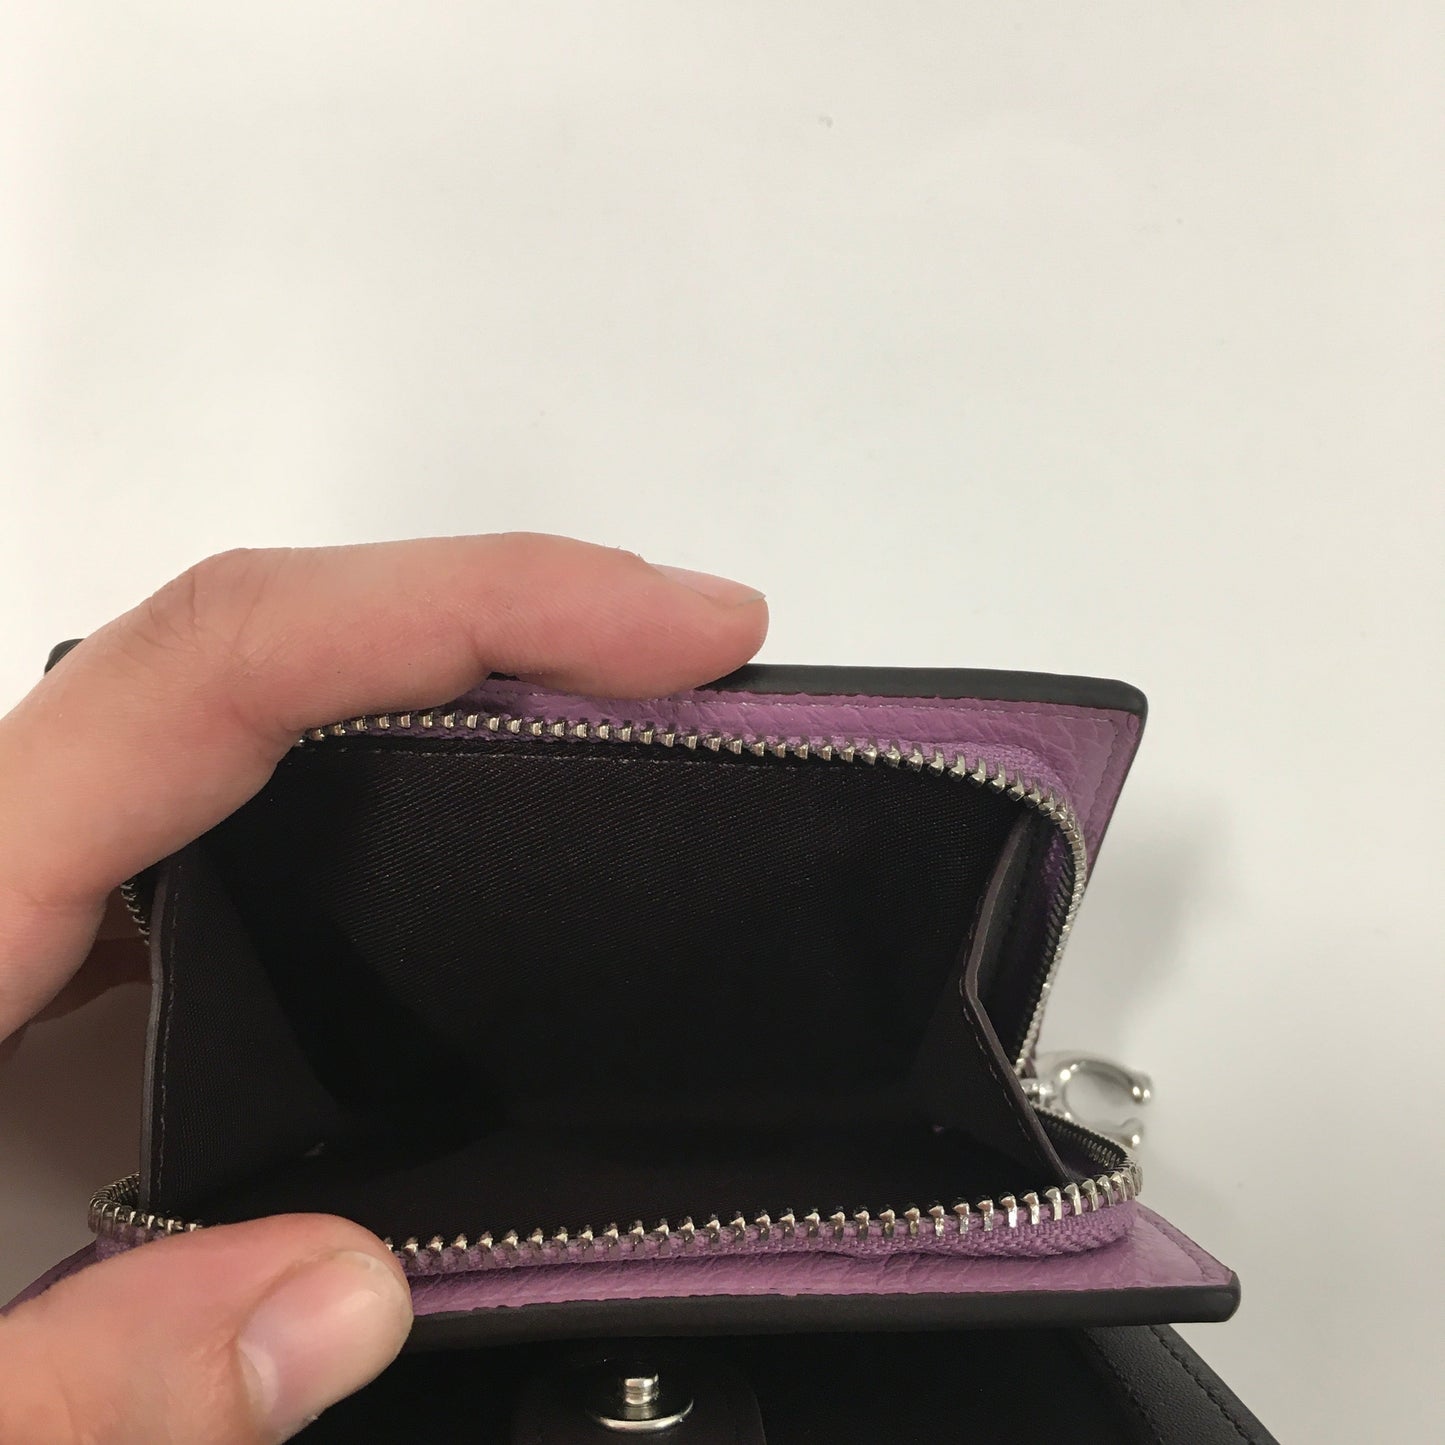 Wallet Coach, Size Small